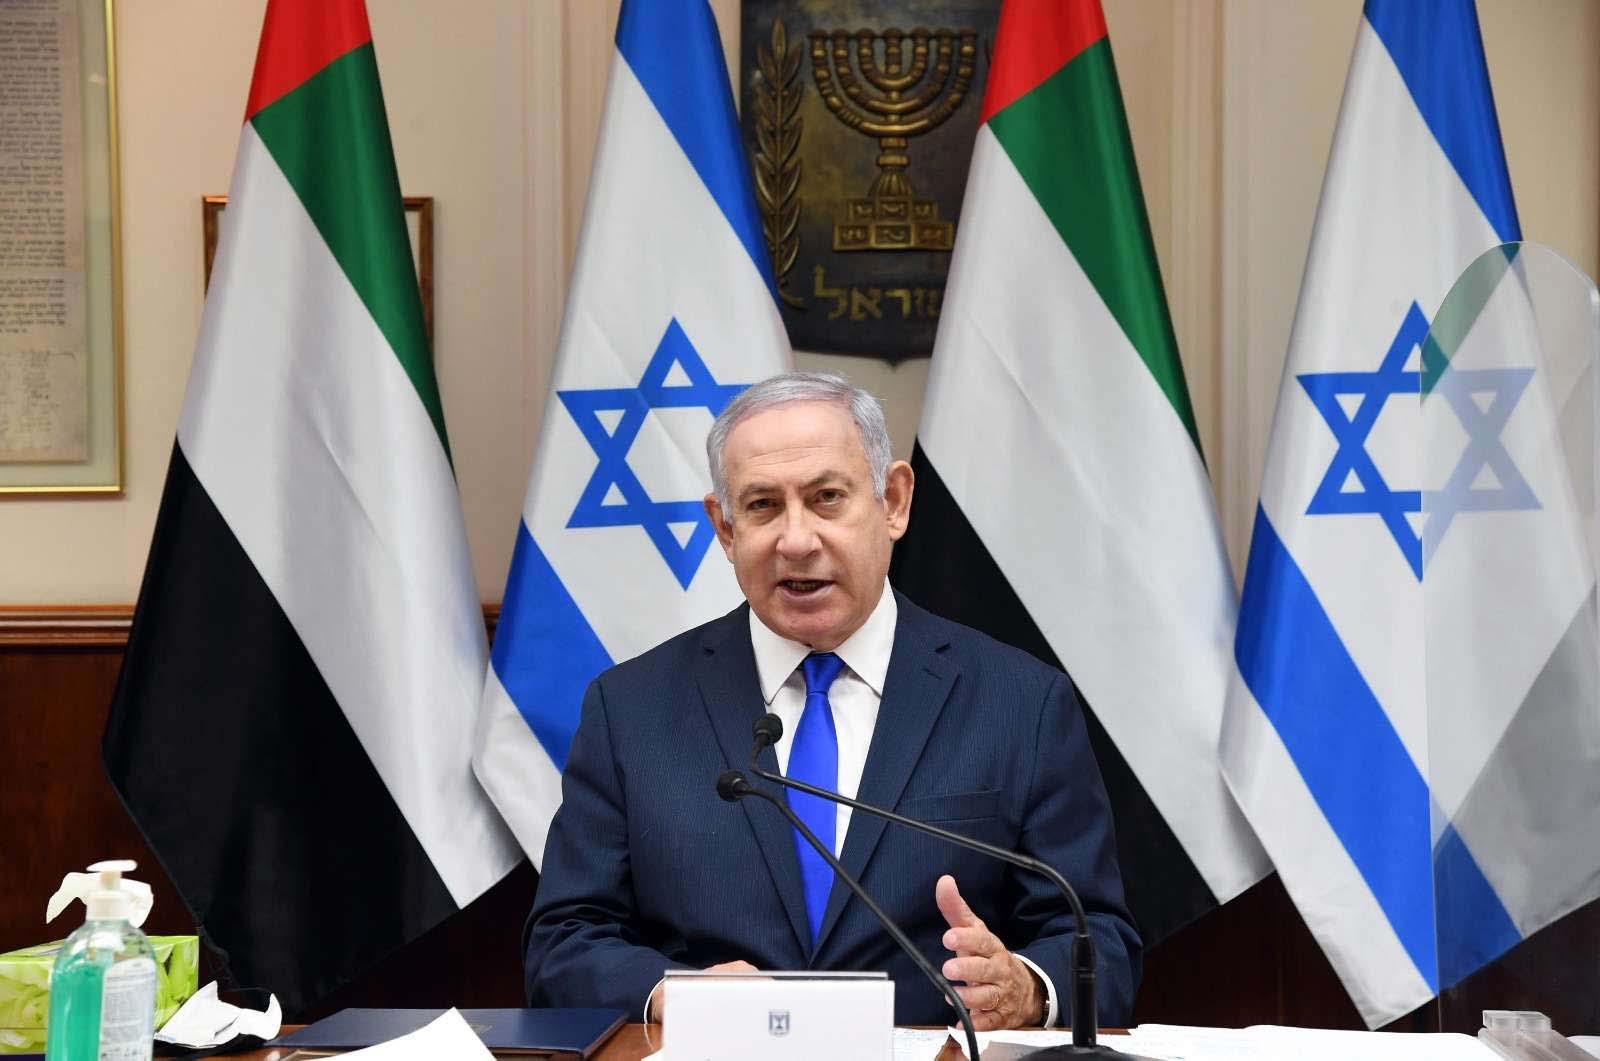 Israeli cabinet’s approval of the normalisation deal with UAE opens the way for Israel's parliament to ratify it